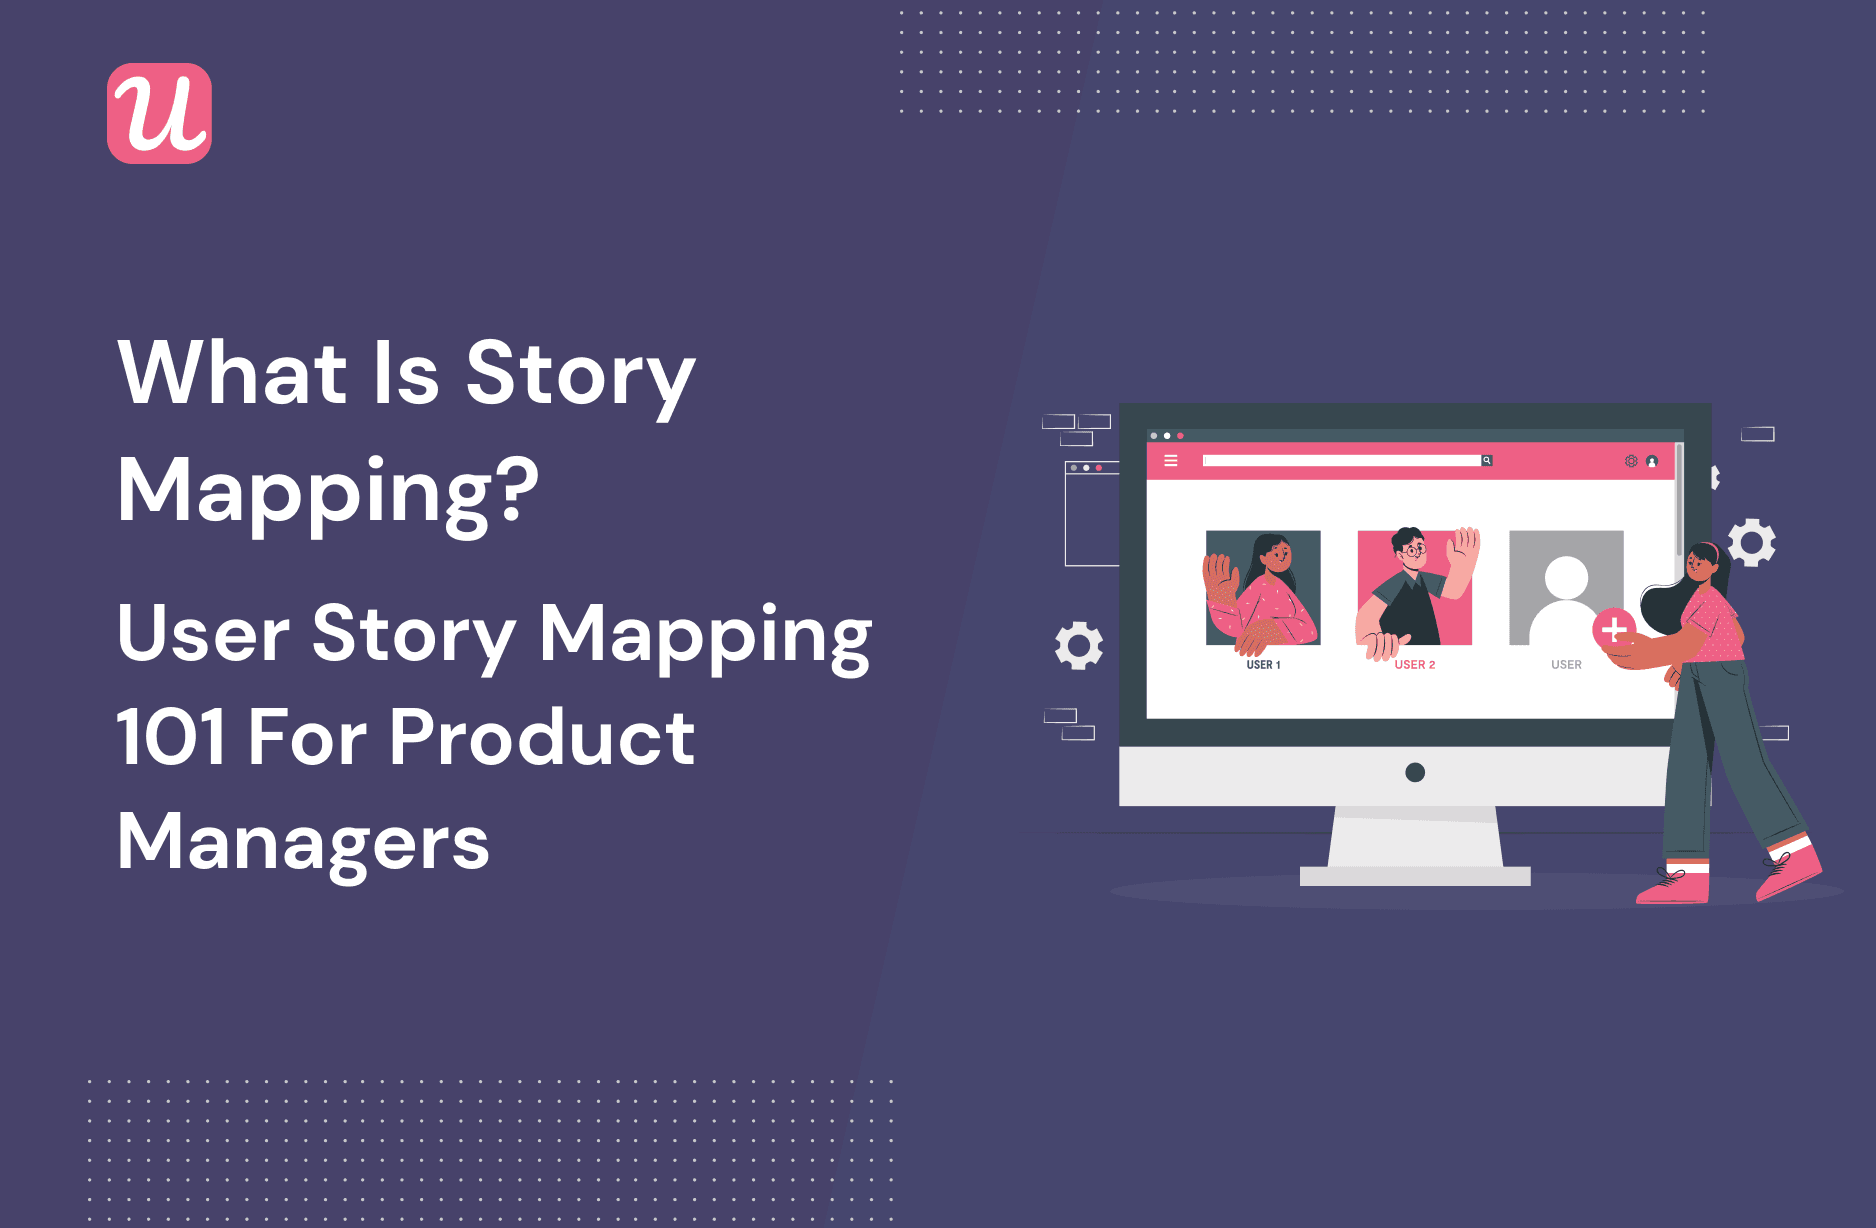 What is Story Mapping? User Story Mapping 101 for Product Managers